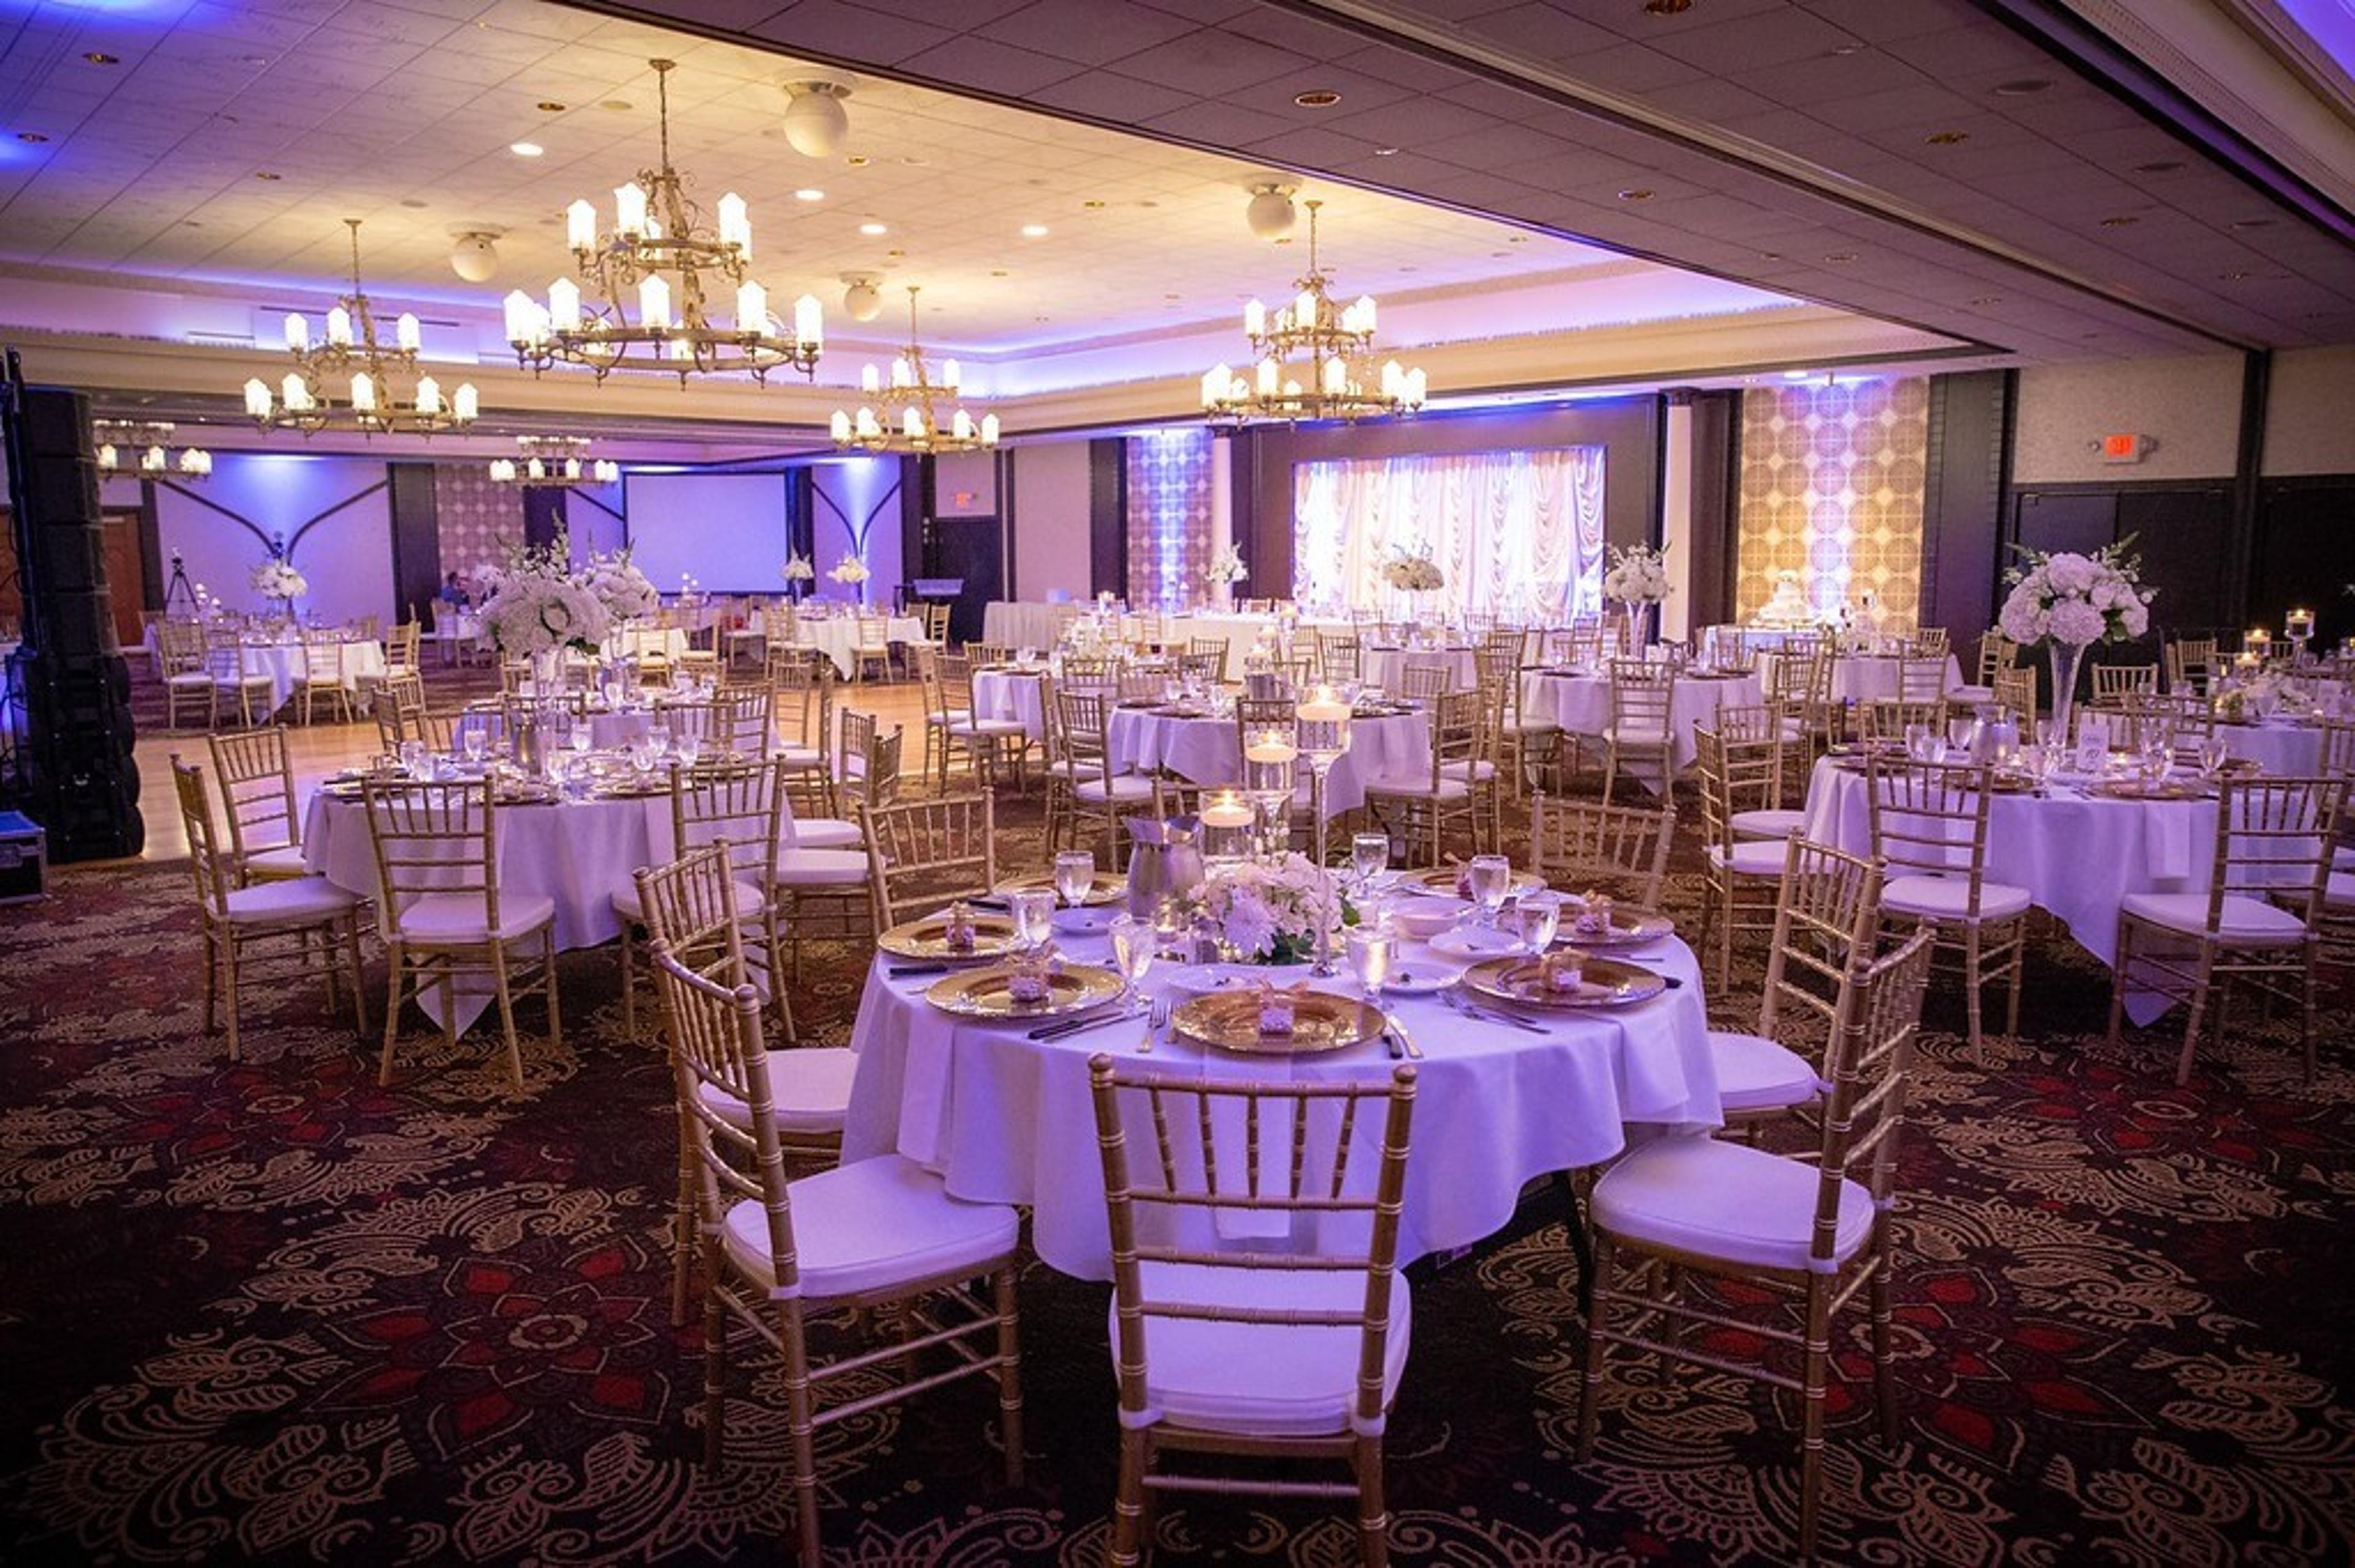 The Tangier Banquets and Catering